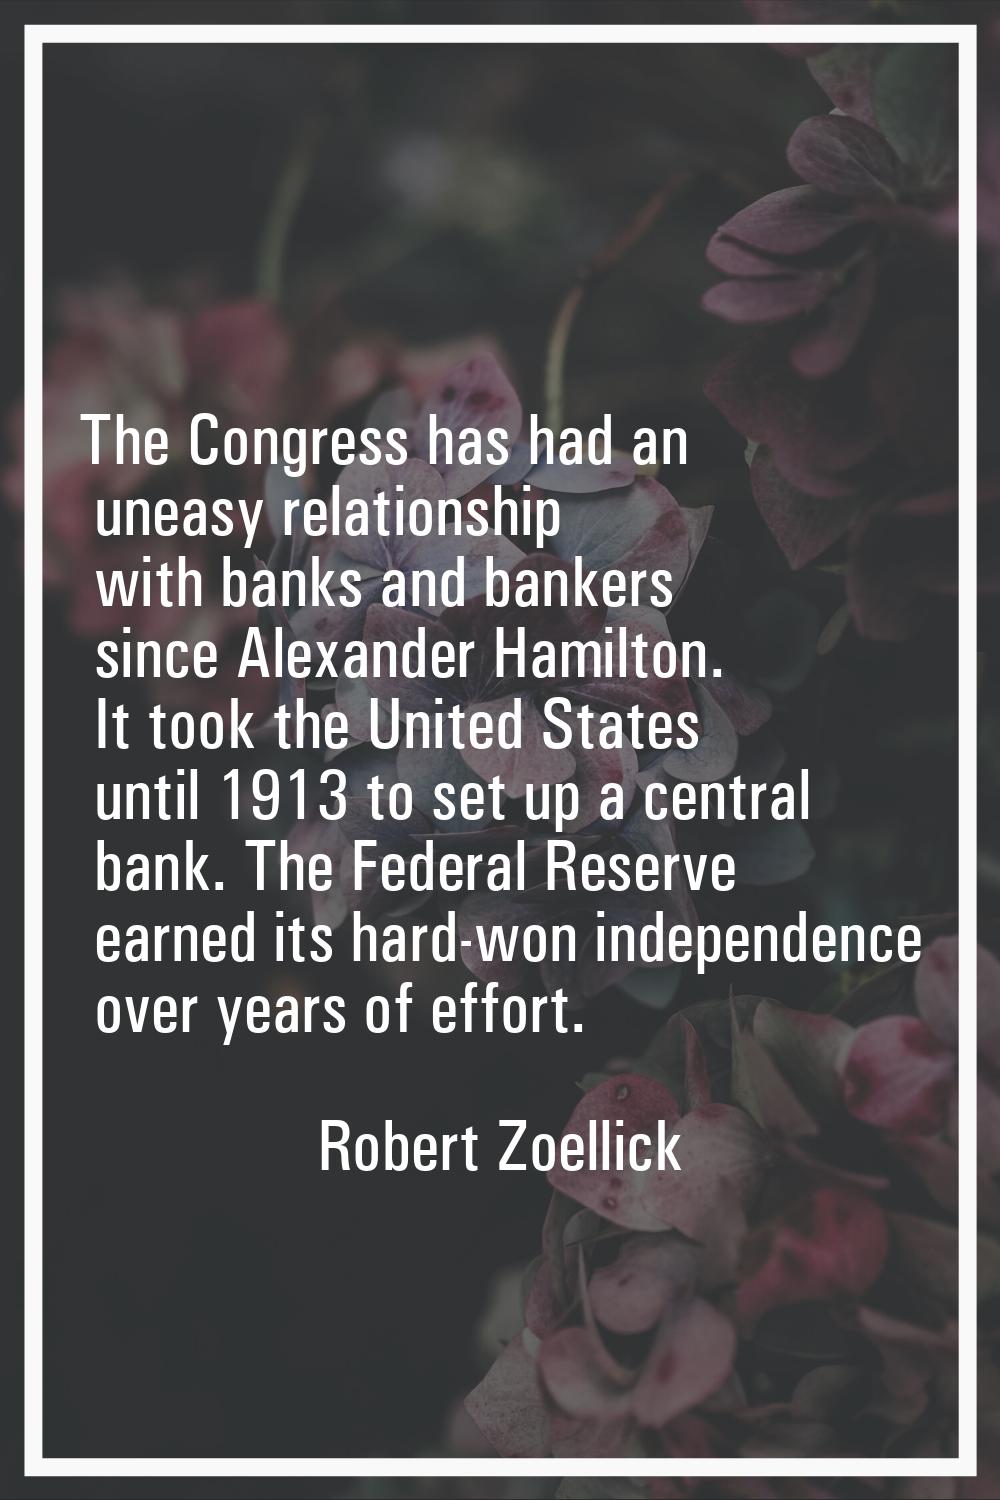 The Congress has had an uneasy relationship with banks and bankers since Alexander Hamilton. It too